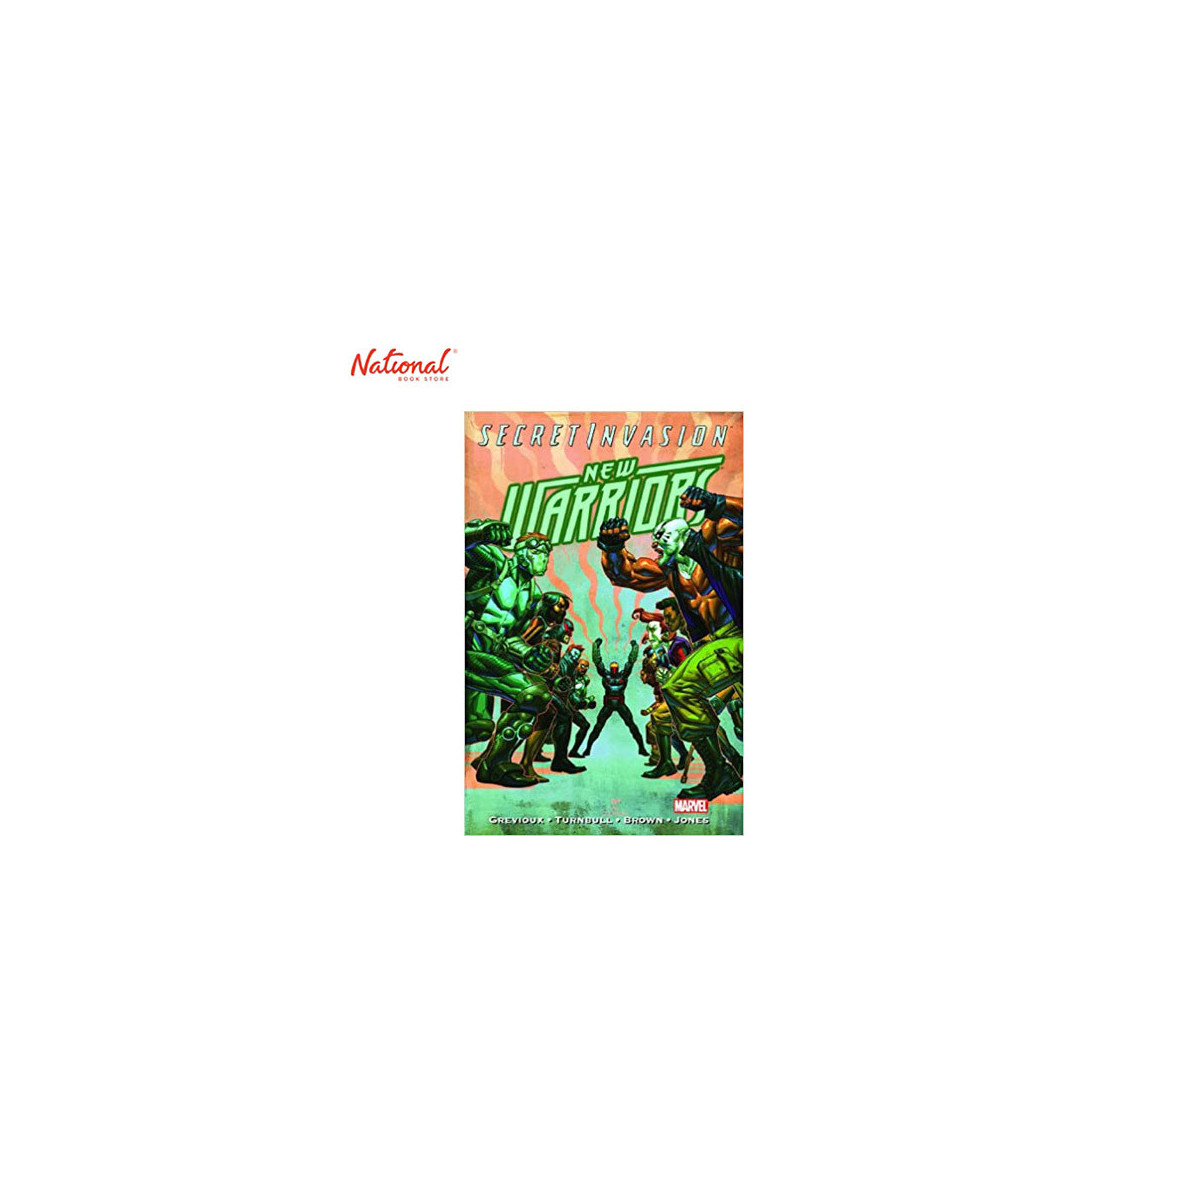 KEVIN　NEW　SECRET　BY　BOOK)　TRADE　(GRAPHIC　PAPERBACK　COMIC　GREVIOUX　NOVEL　INVASION:　WARRIORS